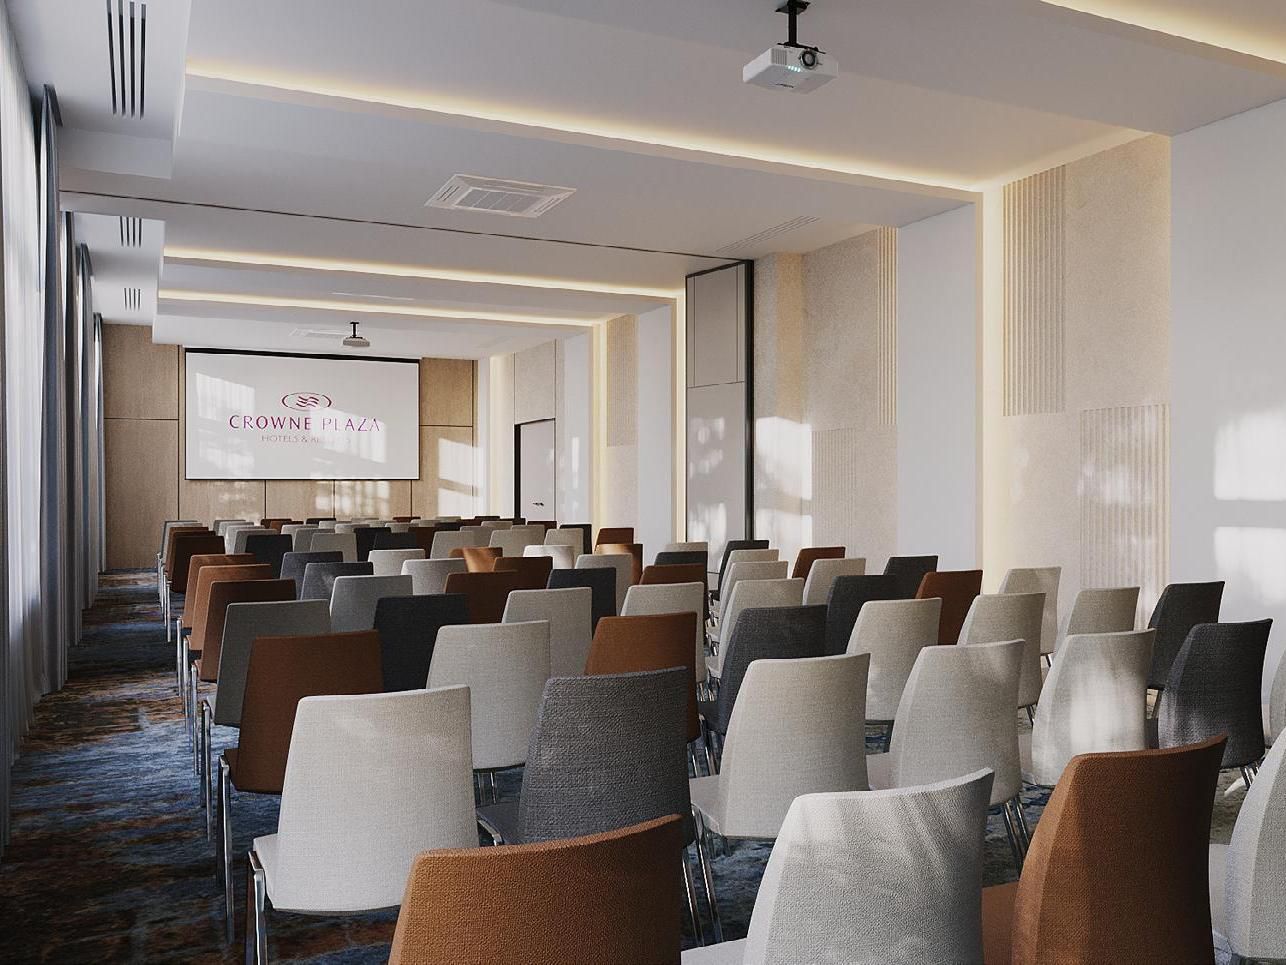 Modern and multifunctional conference rooms are the perfect option for business meetings, trainings and conferences, as well as private events. Well-equipped conference hall with a capacity of 10 to 100 people will satisfy all the needs of our valued guests. 